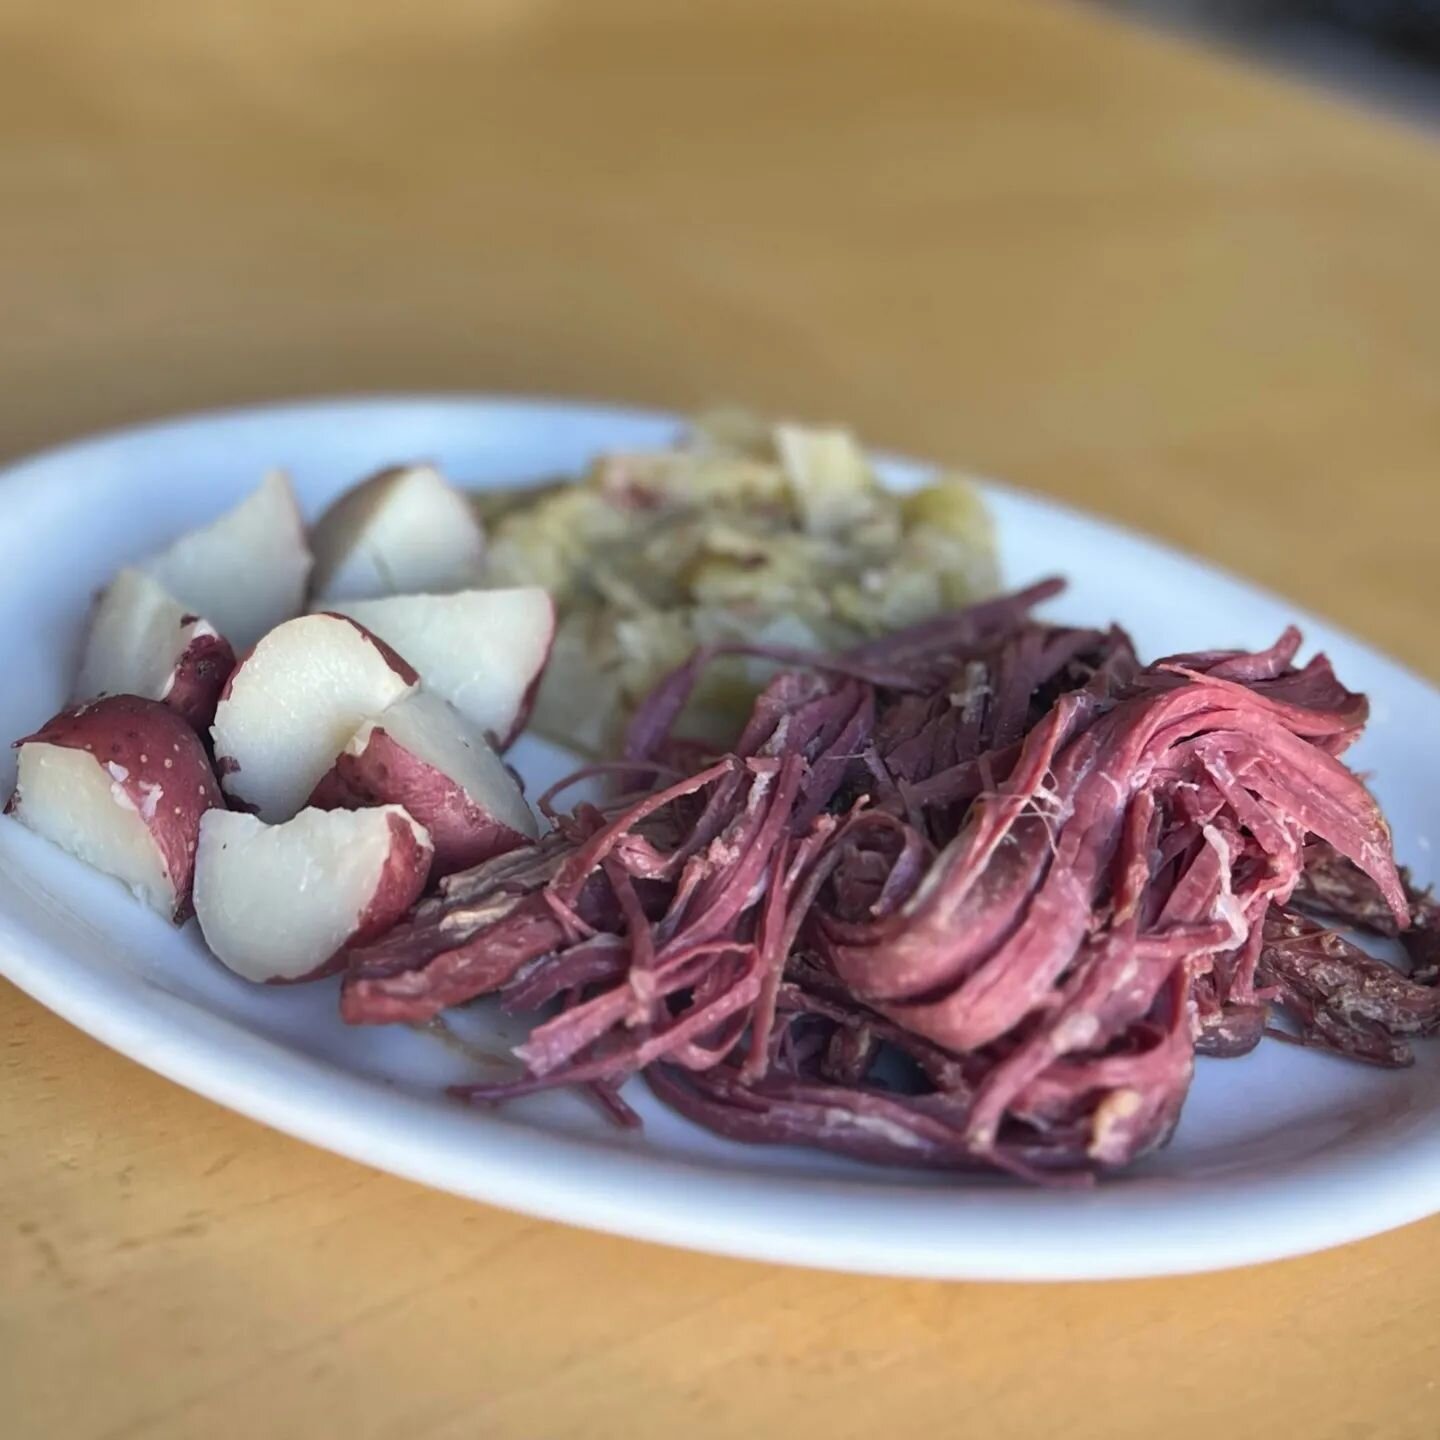 It's corned beef and cabbage time at Hollerbach's! Succulent corned beef from whole steamship rounds, fresh red boiled potatoes, braised cabbage made with onions and applewood smoked bacon, our Dijon egg sauce, and Irish soda bread made in our bakery